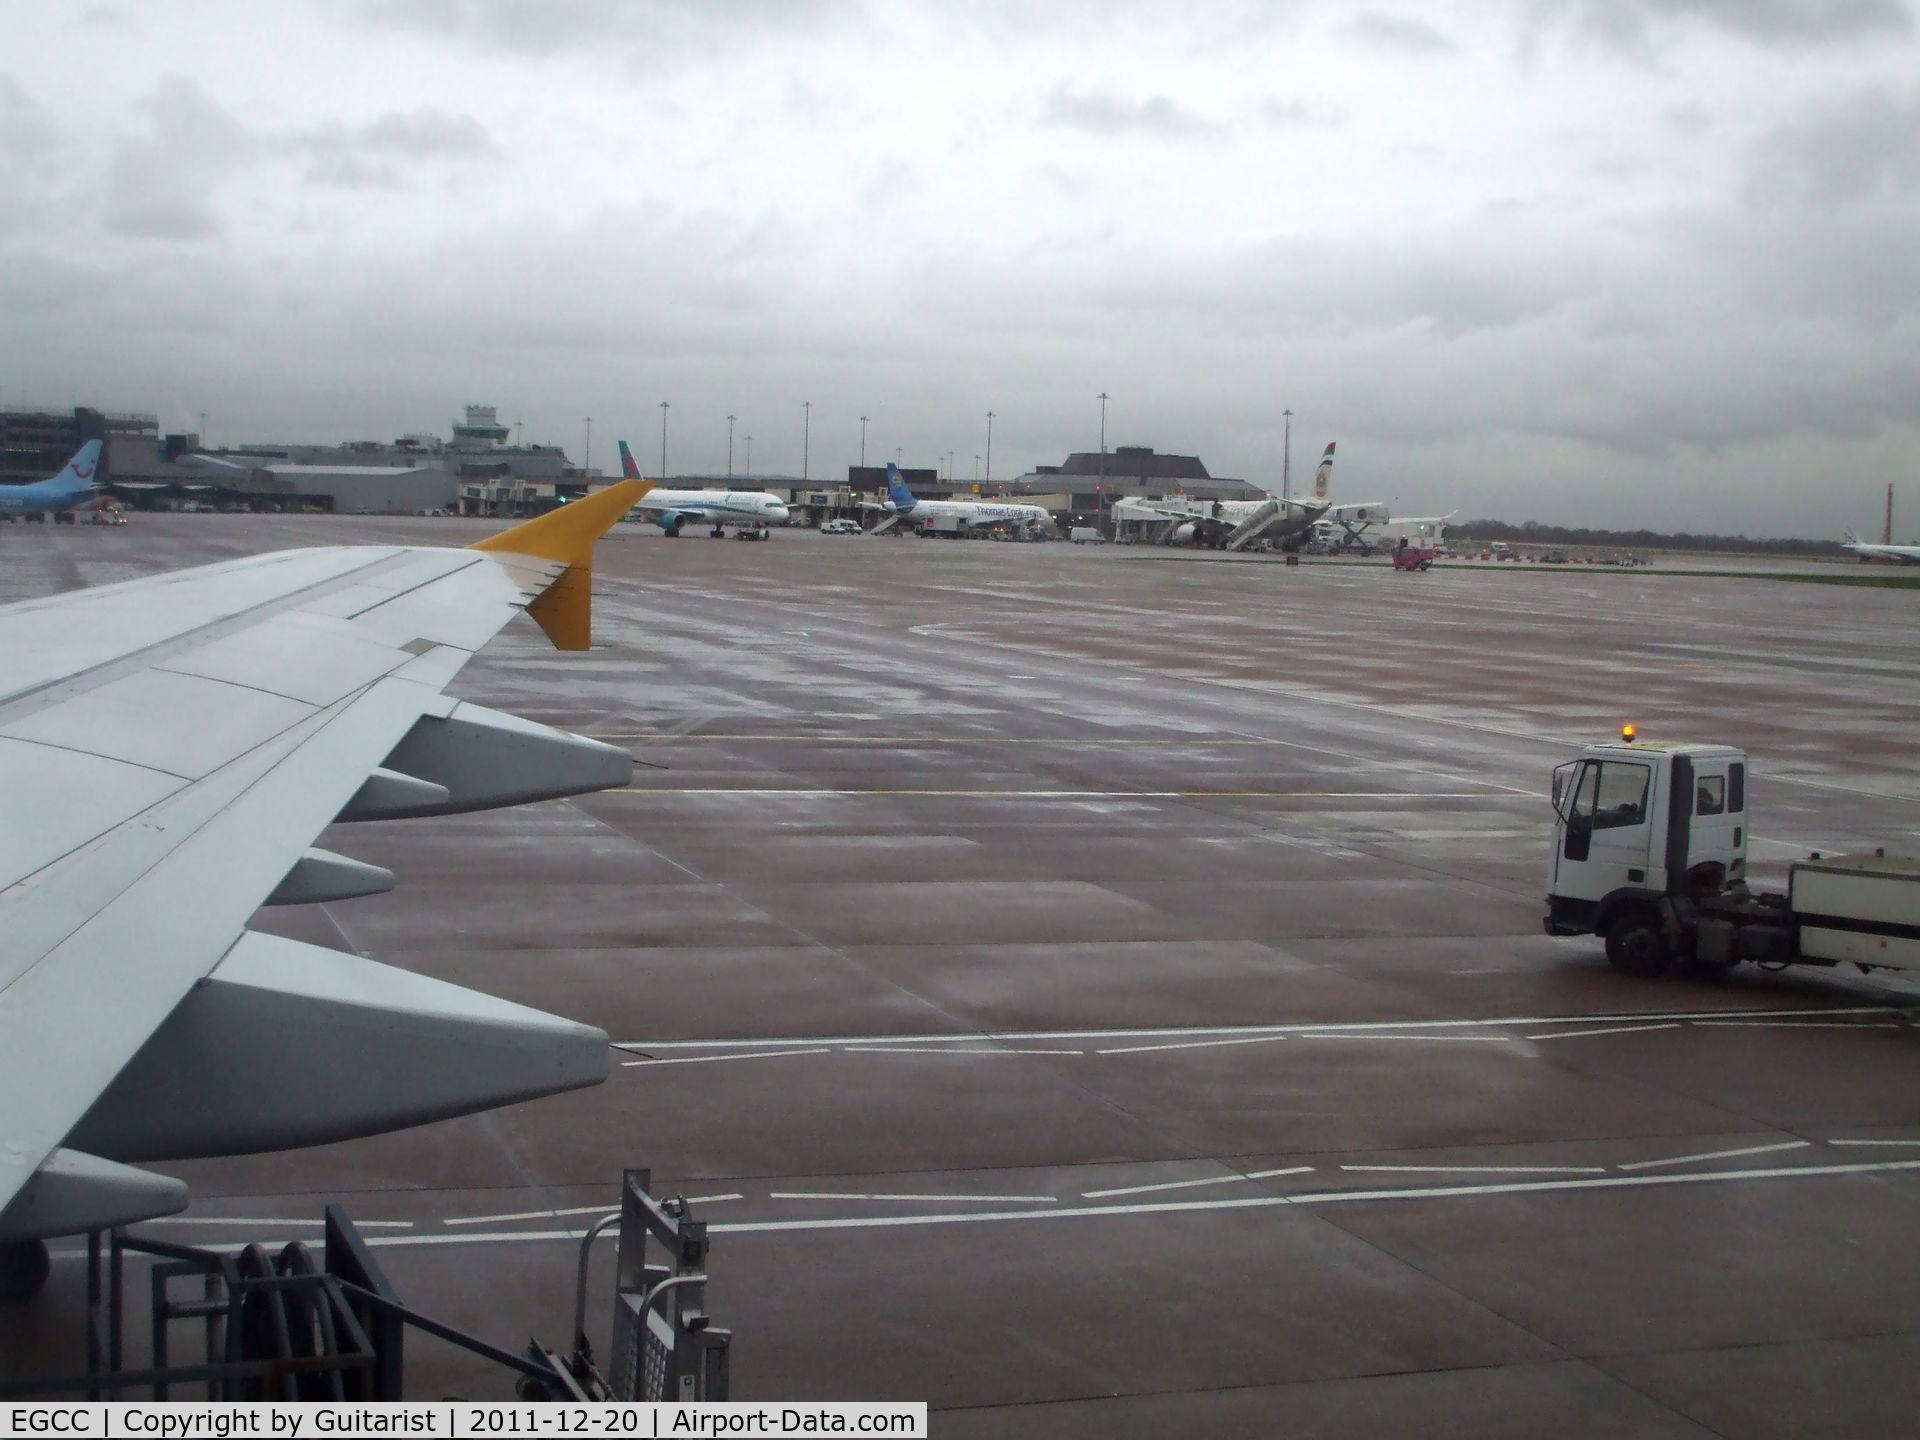 Manchester Airport, Manchester, England United Kingdom (EGCC) - From 20c and sunshine to 5c and rain in 3 hours